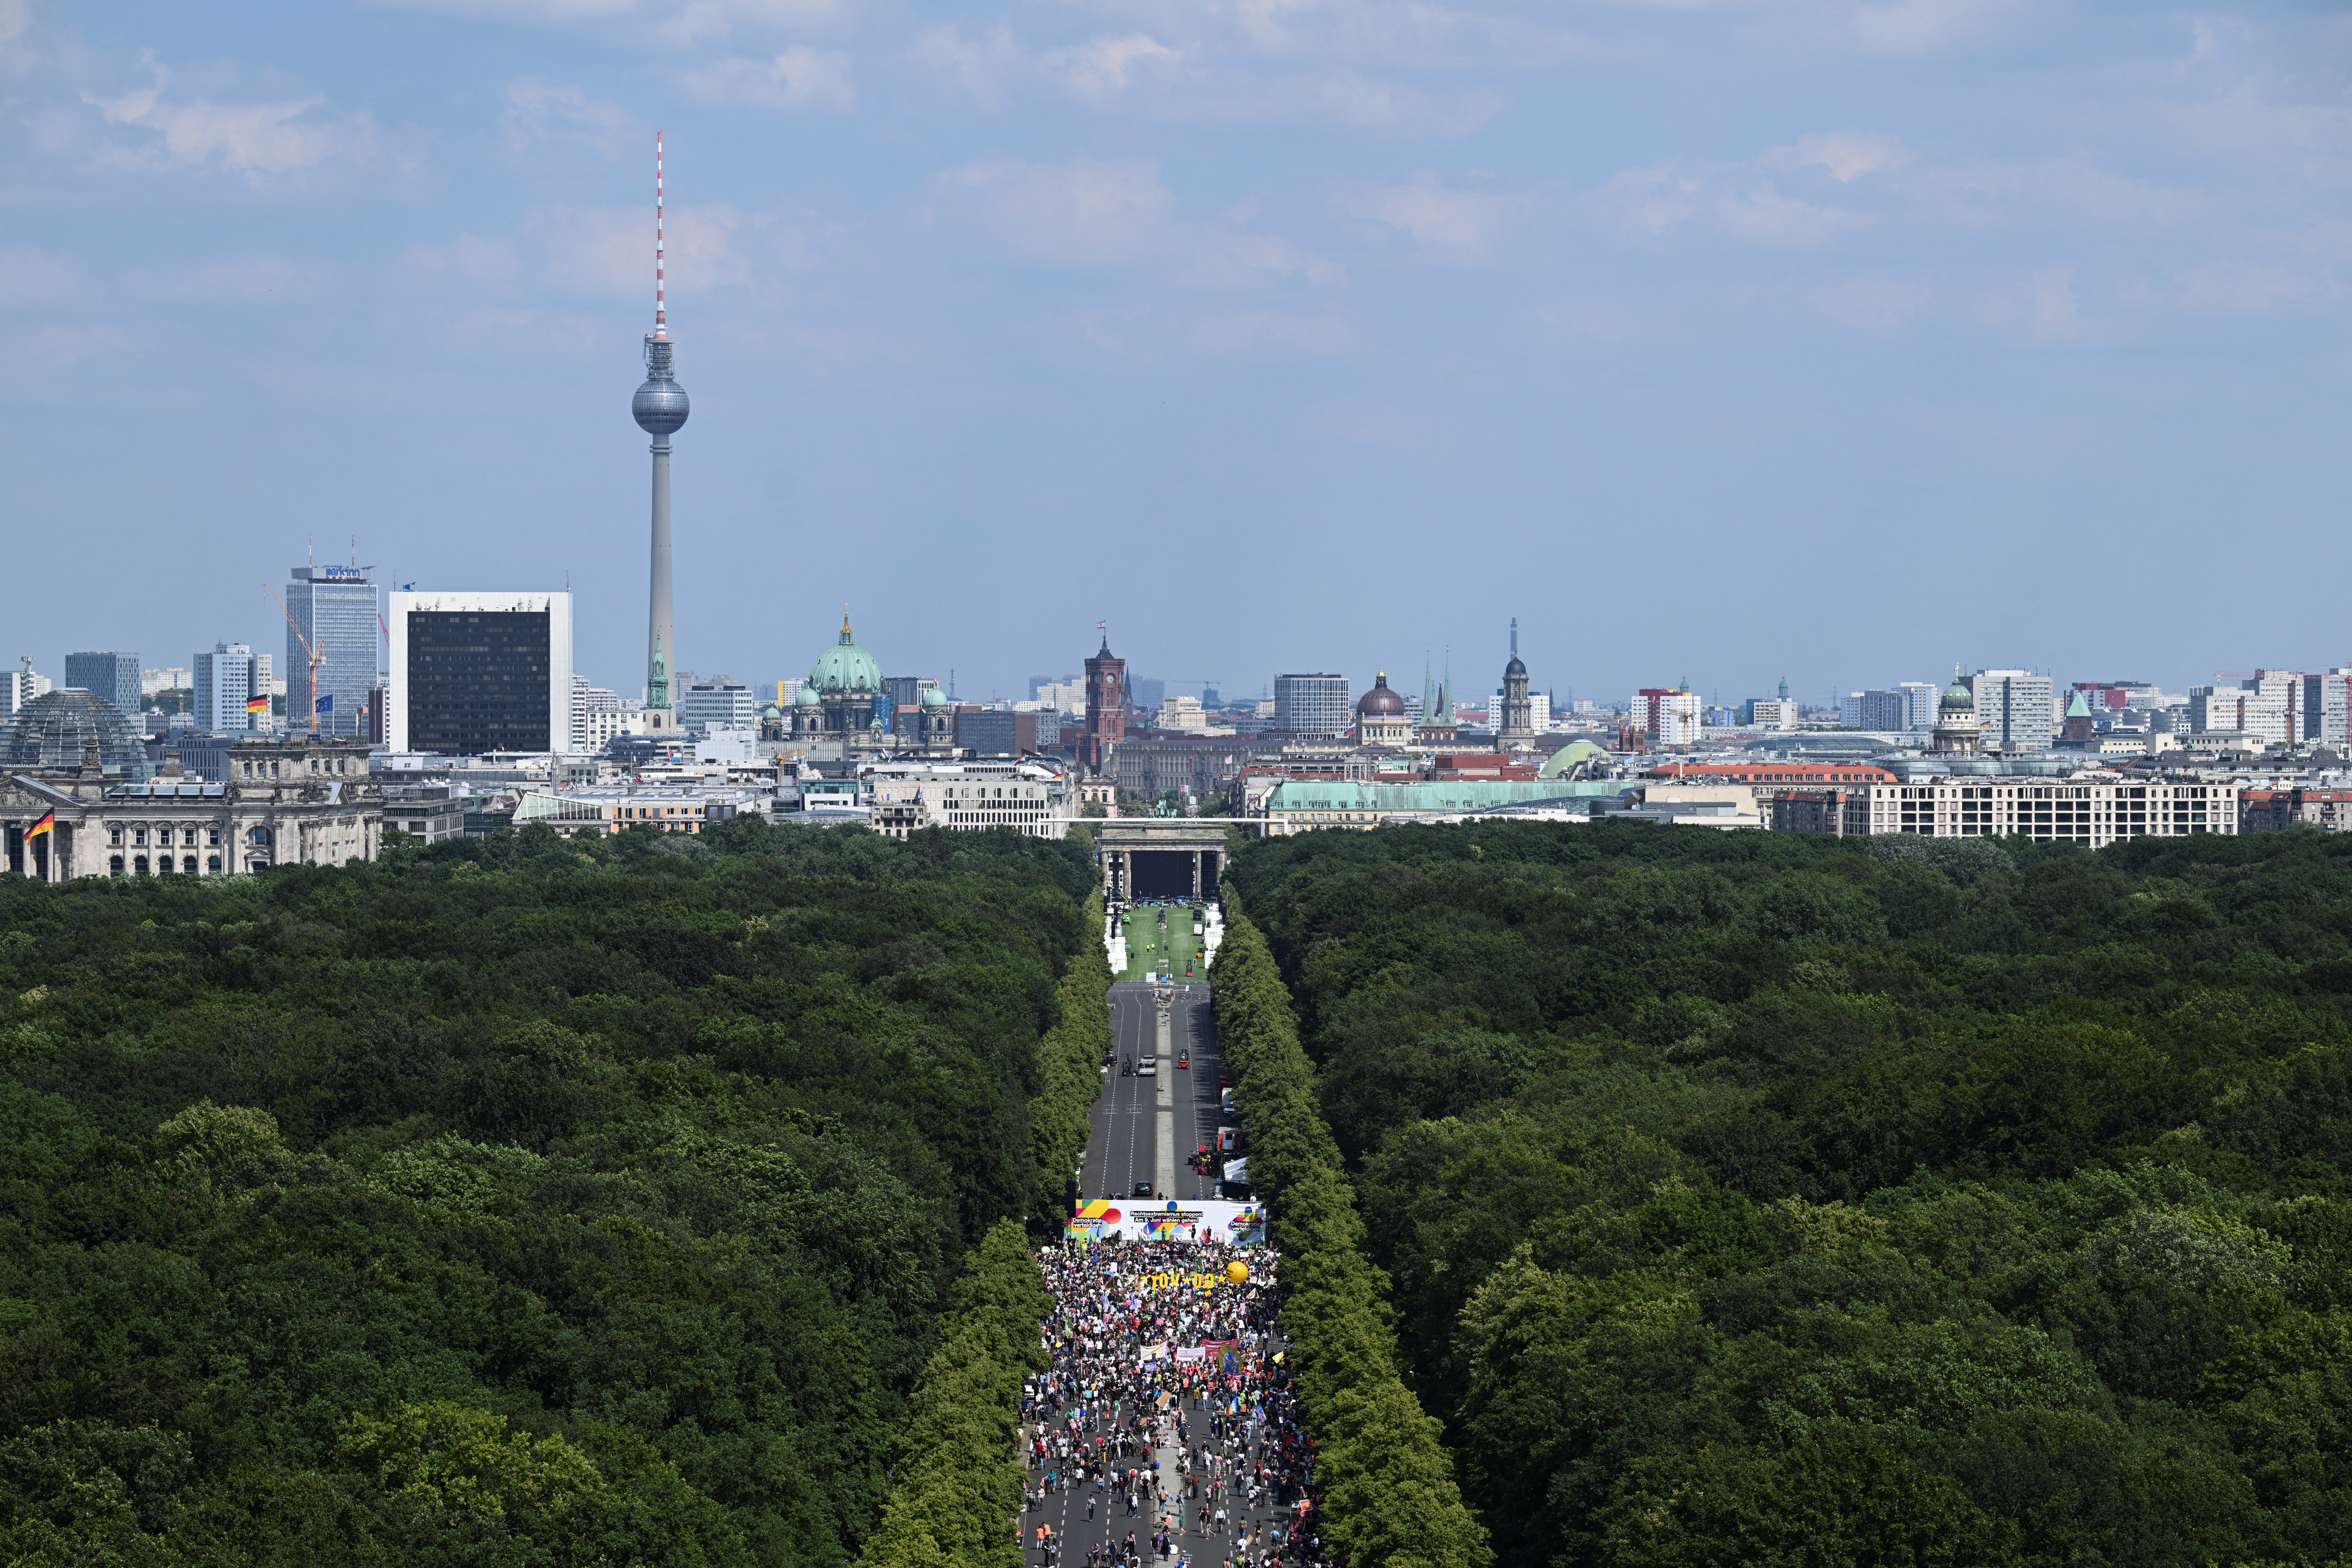 Demonstration against right-wing extremism and for the protection of democracy, in Berlin